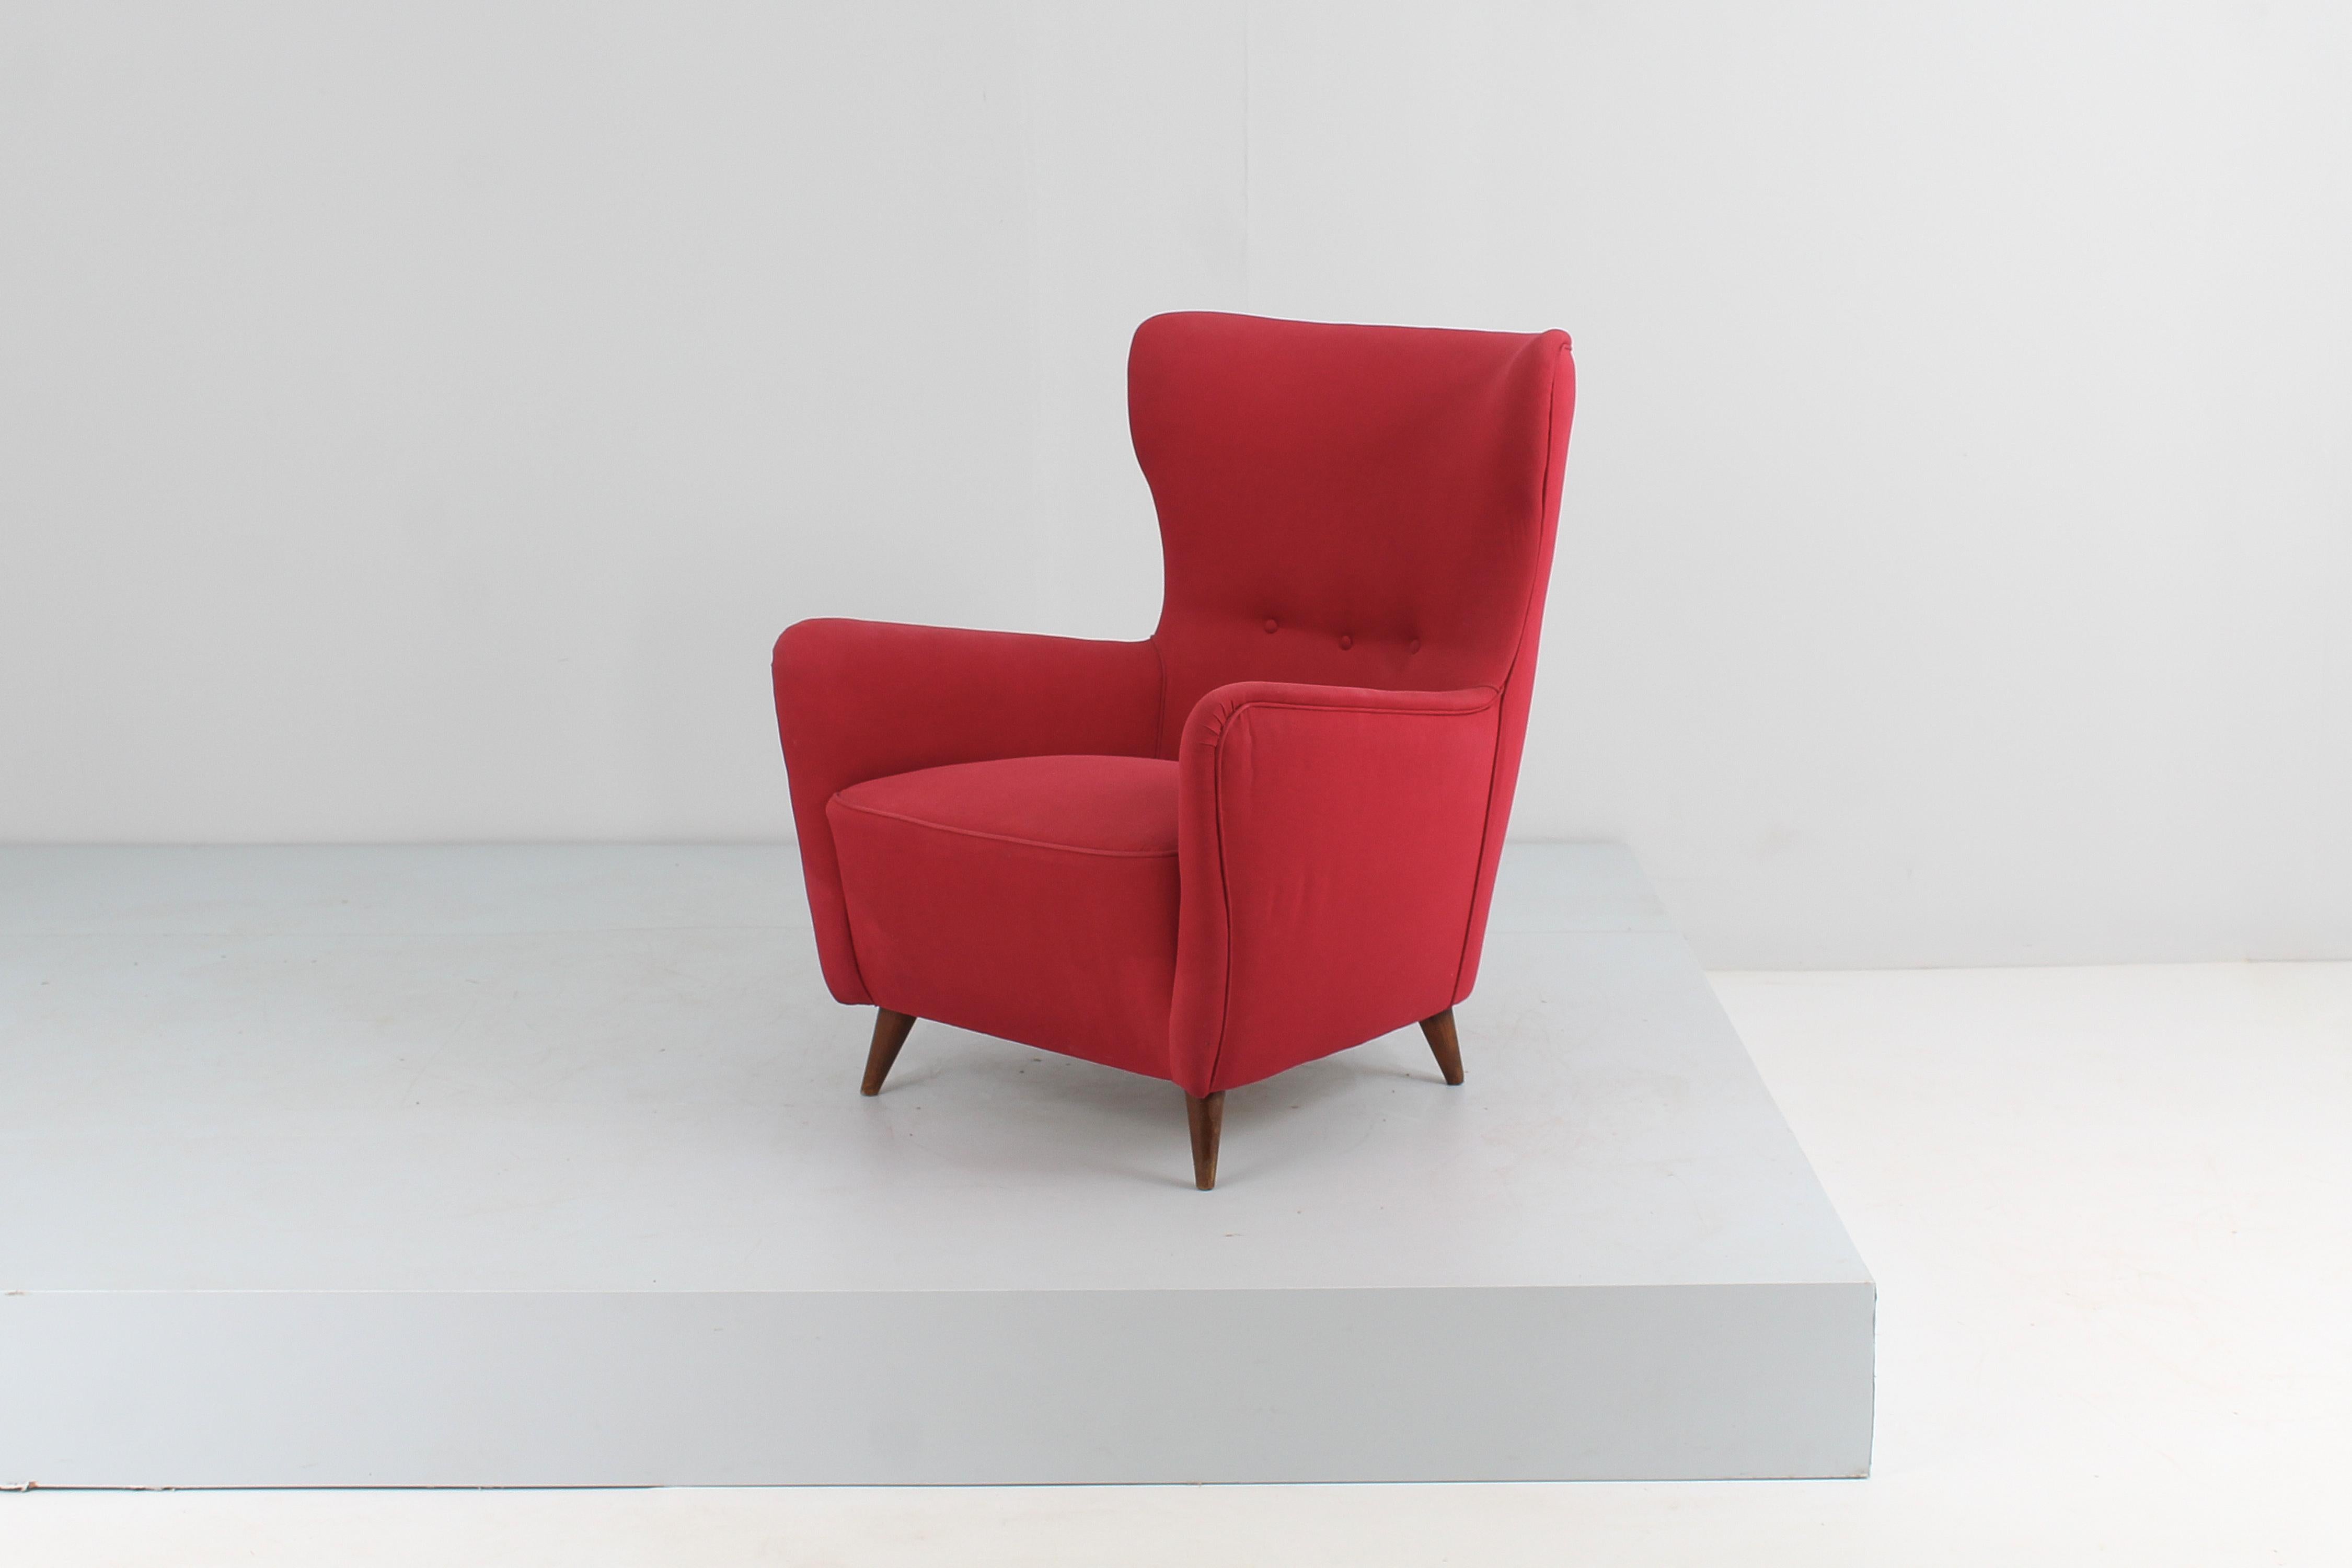 Midcentury Giò Ponti Style Wood and Red Fabric Armchair, circa 1950s Italy  For Sale 2